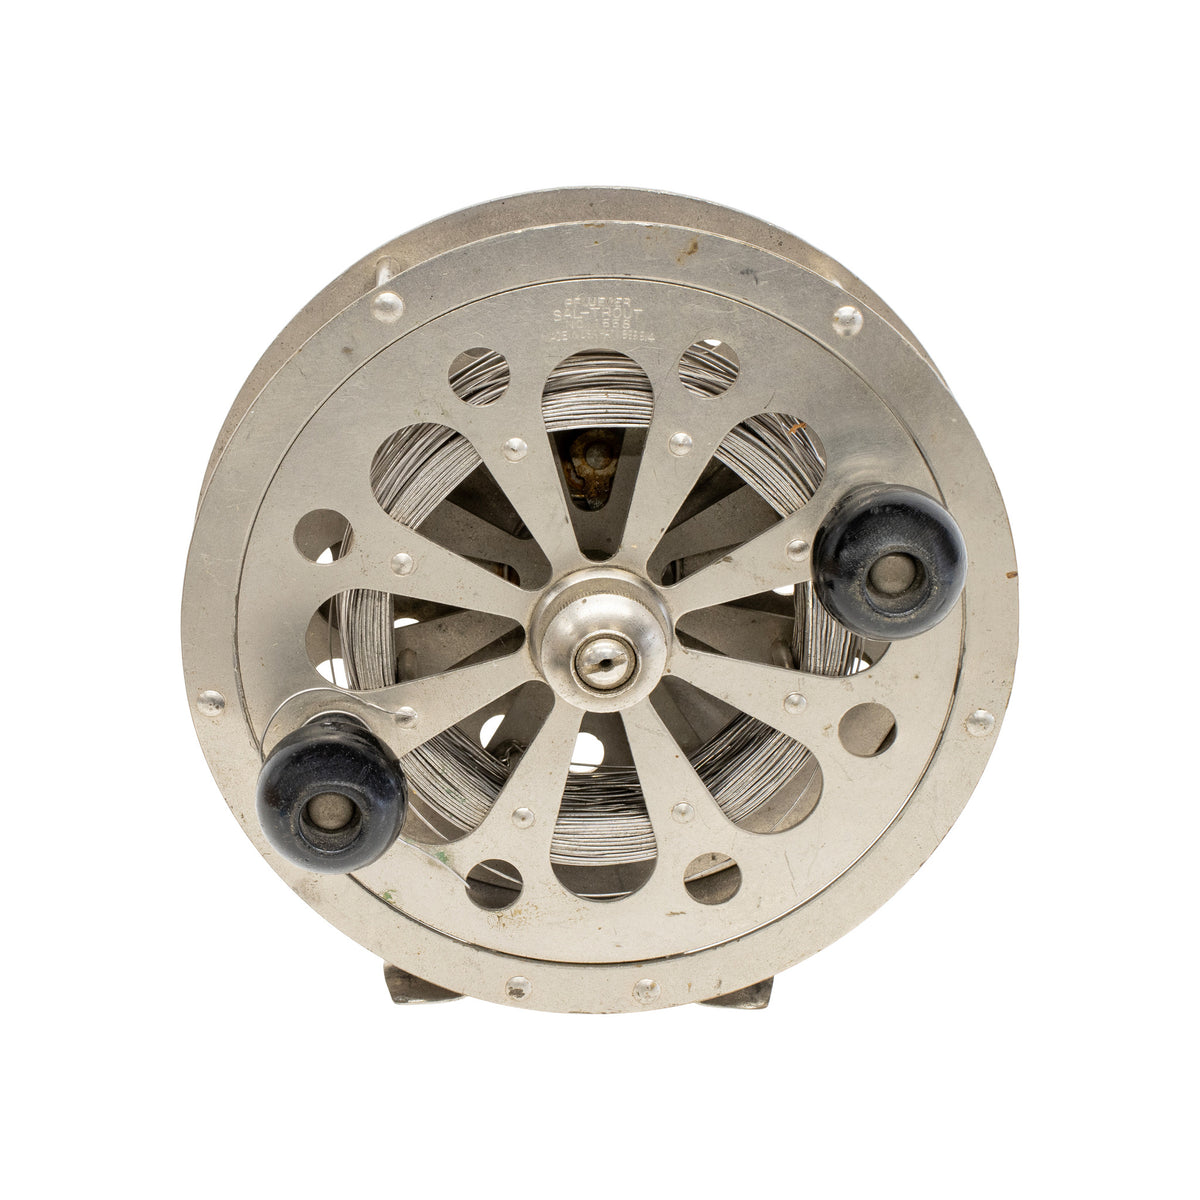 Pflueger Sal-Trout #1558 Fly Reel — Cisco's Gallery